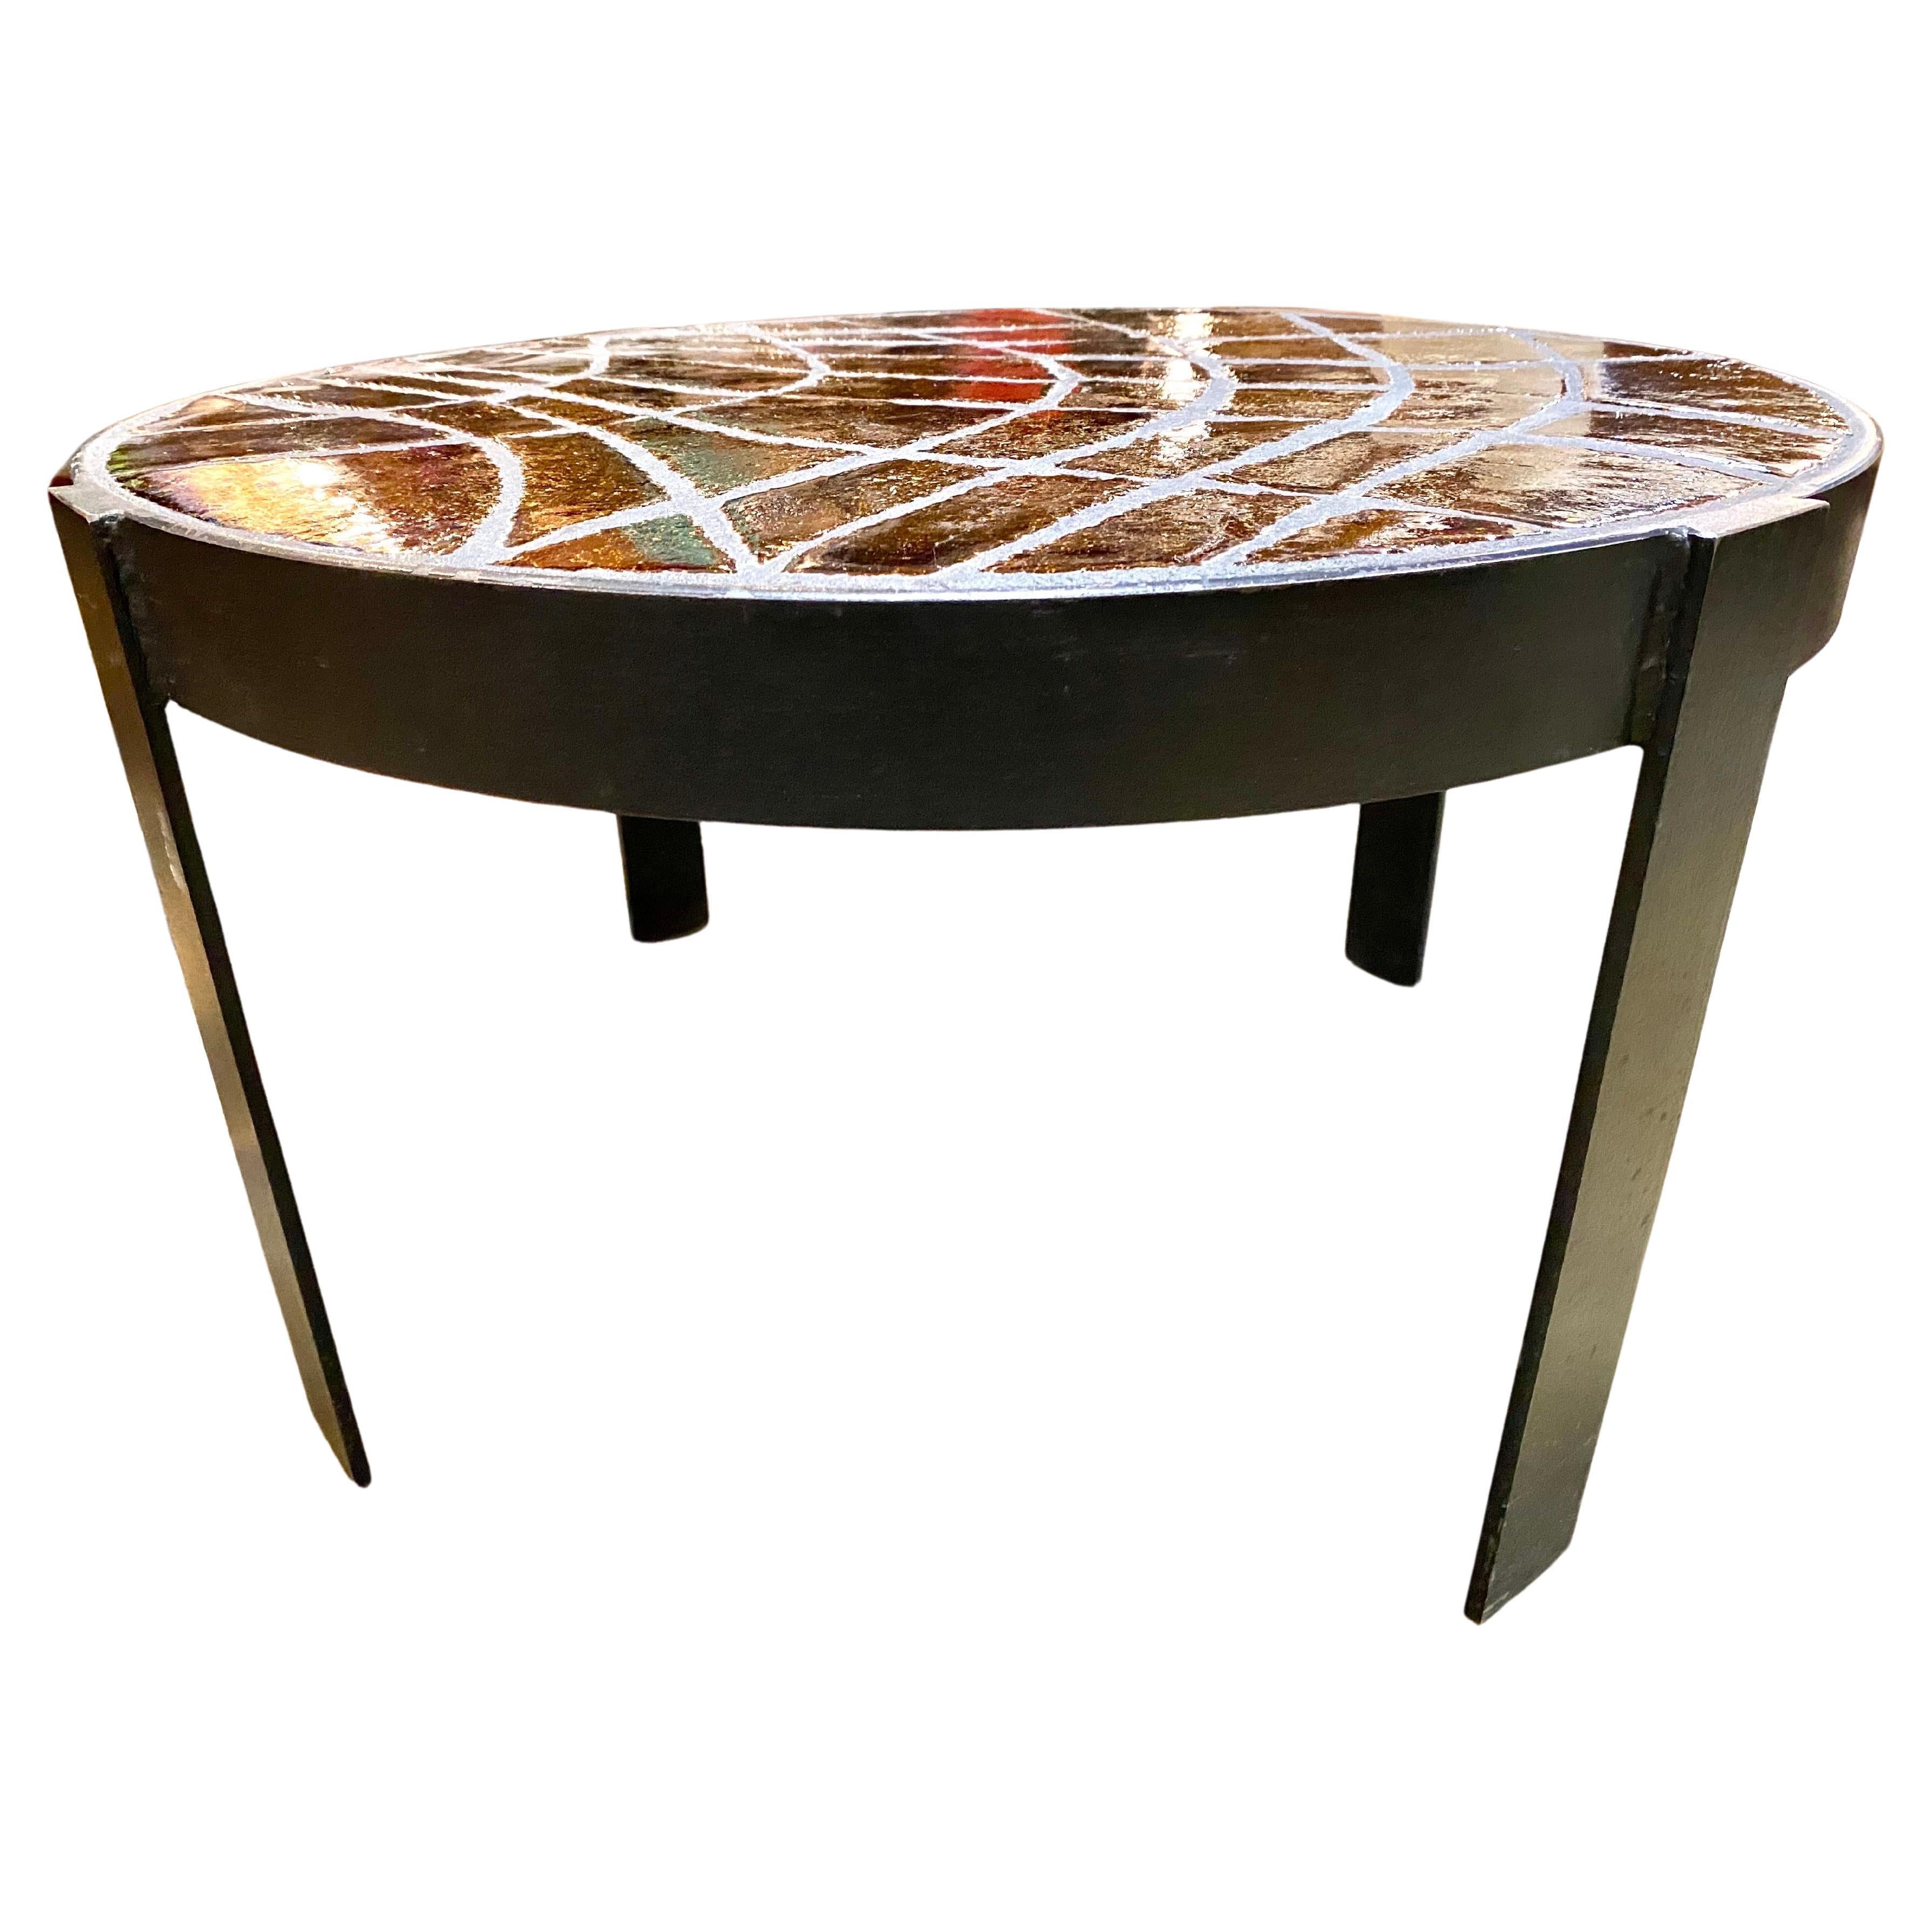 French Ceramic Tile Cocktail Table In The Manner of Roger Capron For Sale